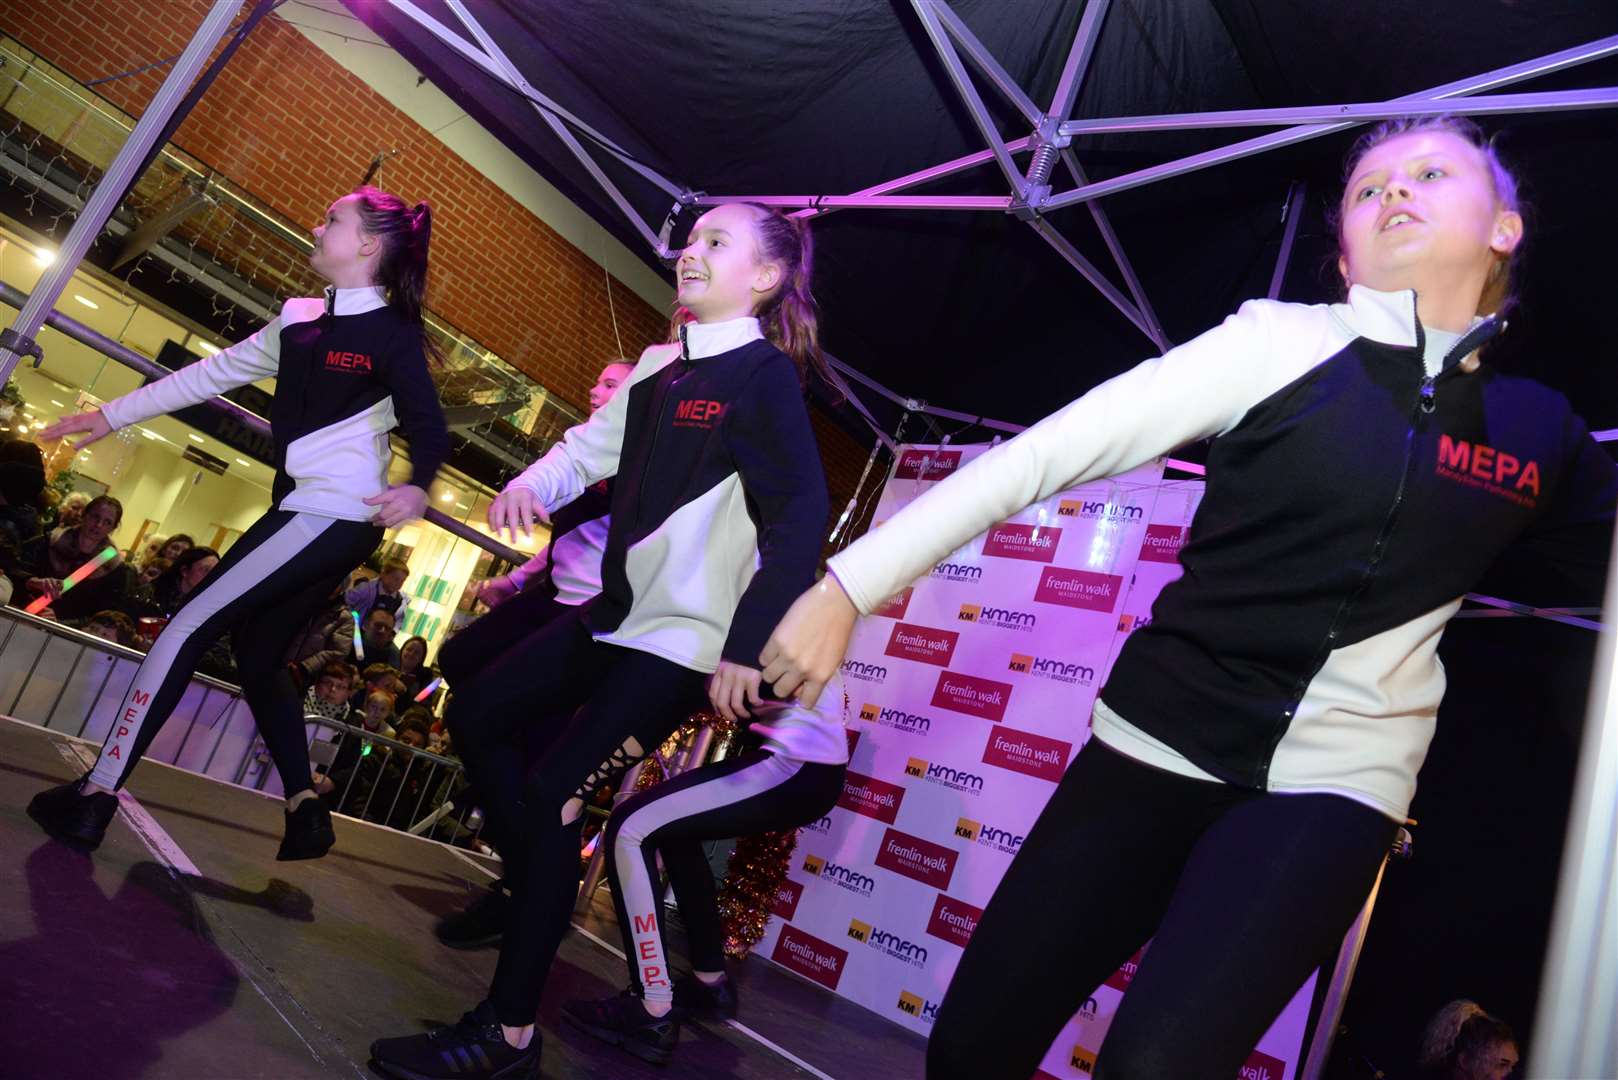 The Mandy Ellen Dancers at last year's Christmas lights switch-on in Fremlin Walk